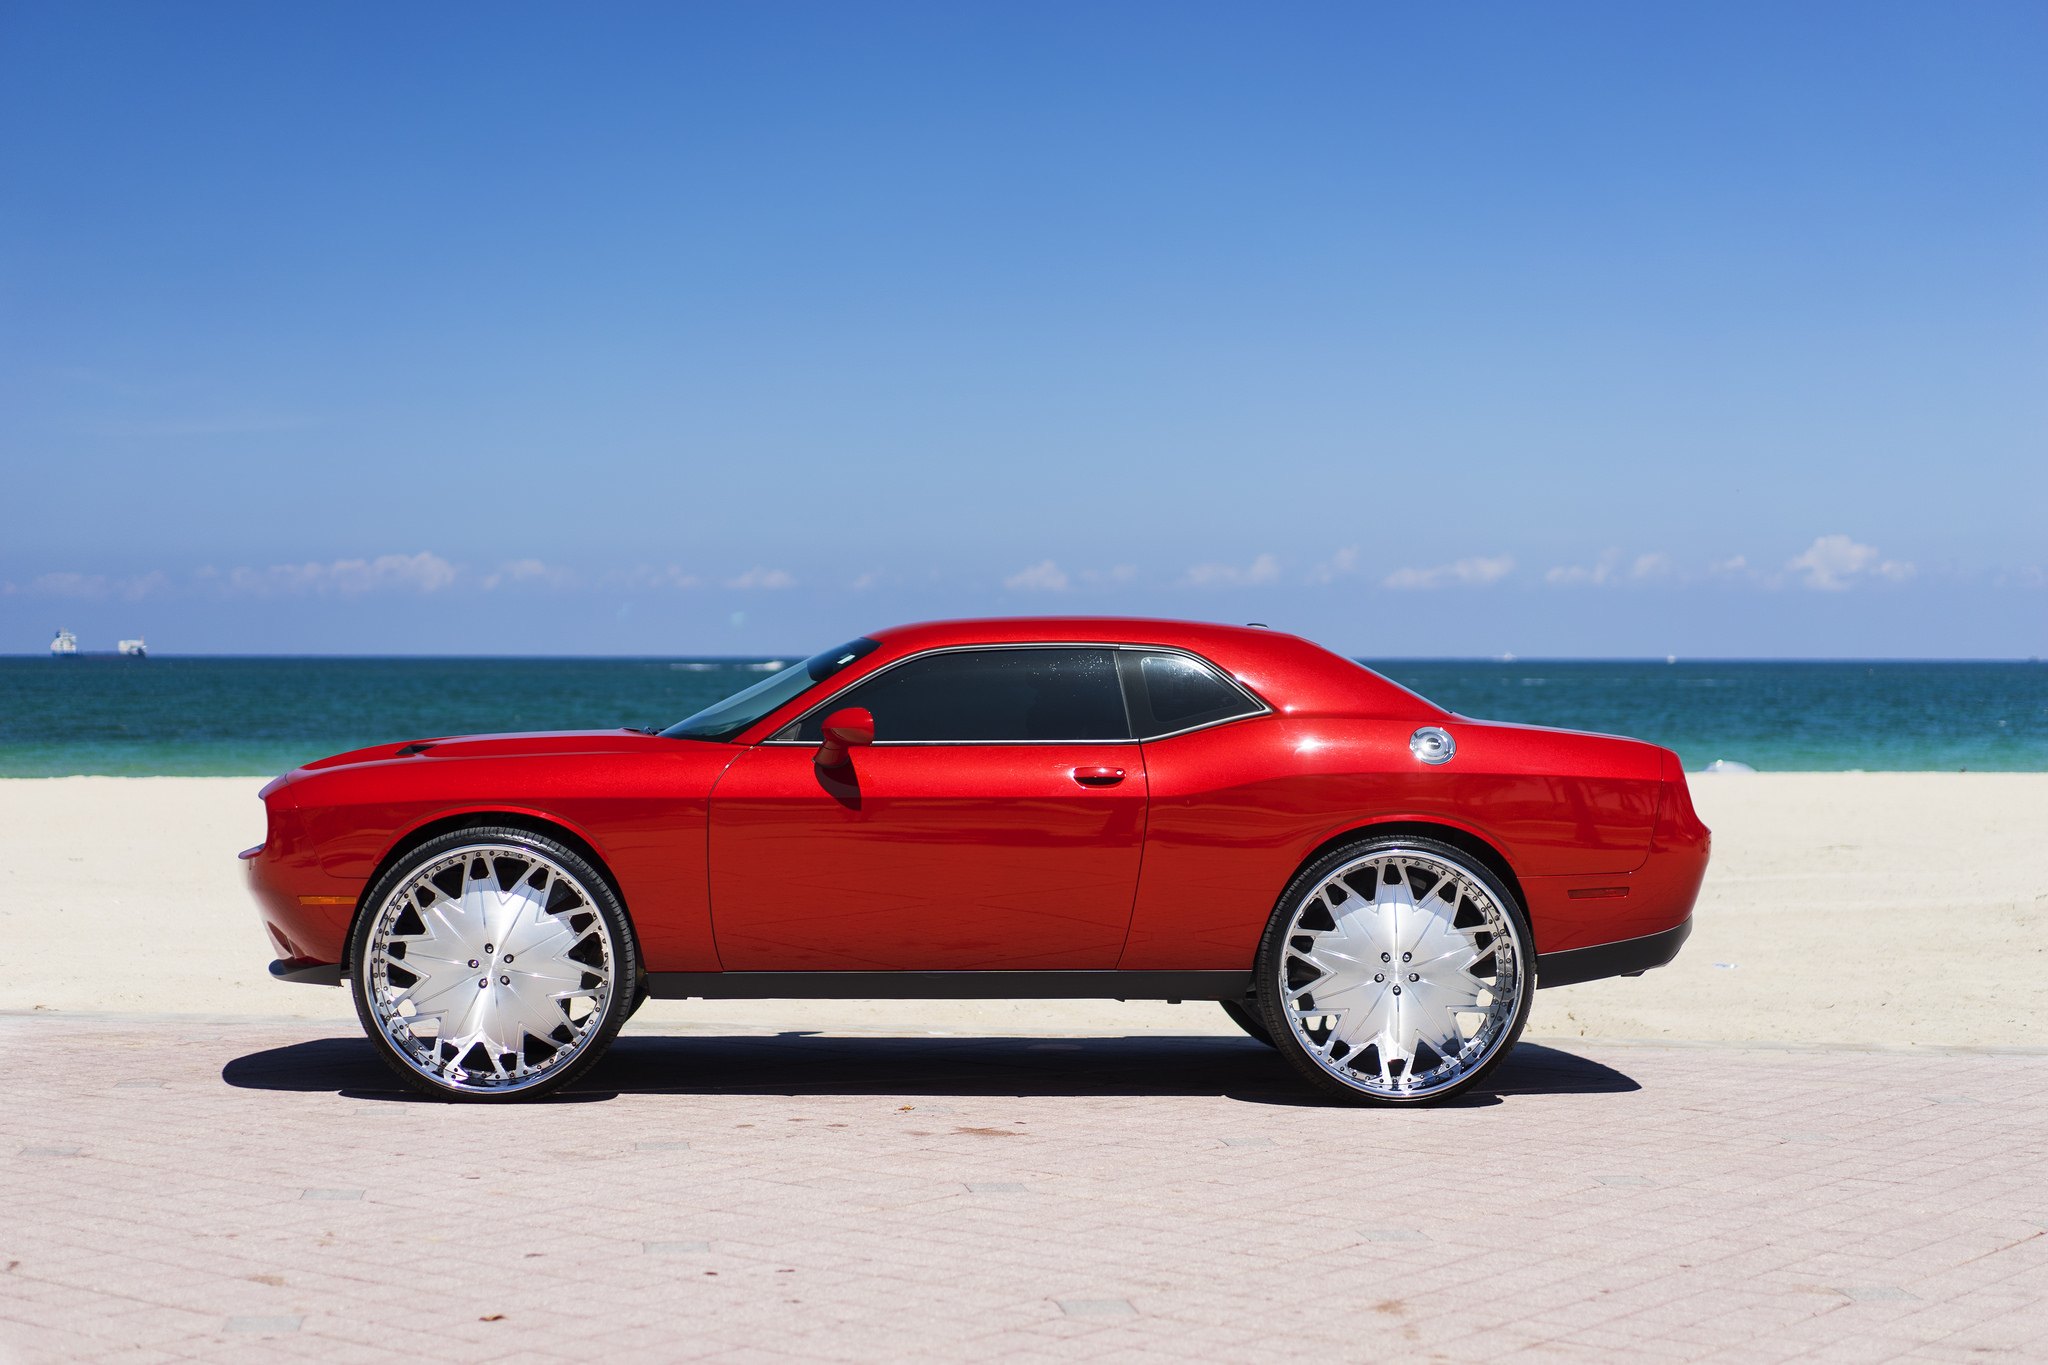 Chrome DUB Rims on Red Dodge Challenger - Photo by DUB